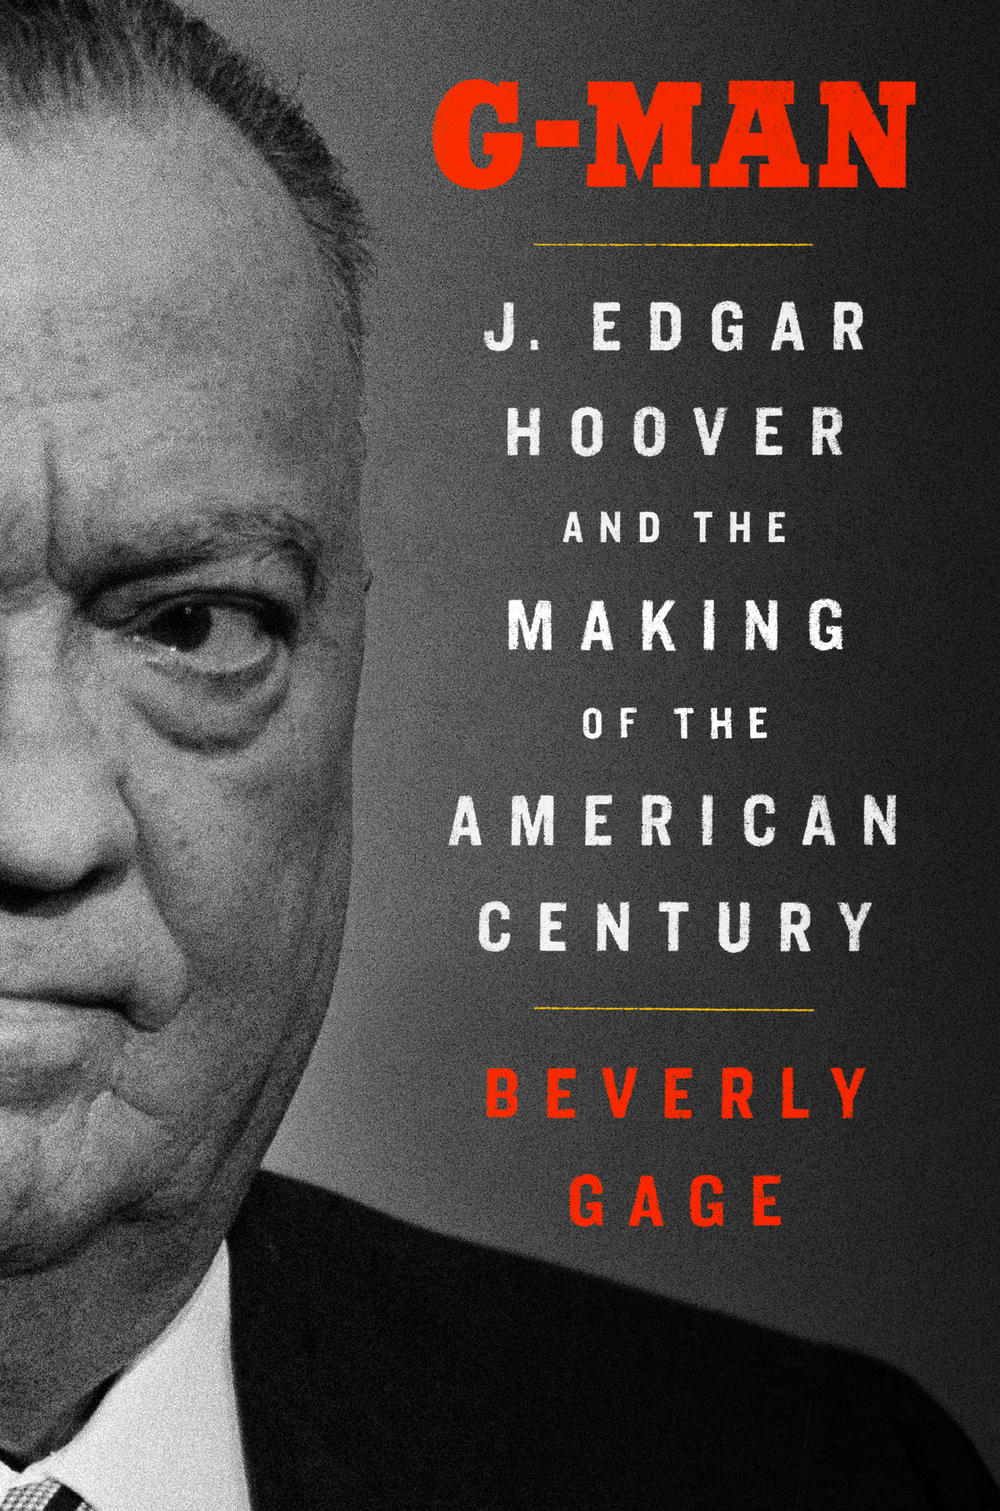 The cover of upcoming J. Edgar Hoover biography, <em>G-Man</em>, by Beverly Gage.